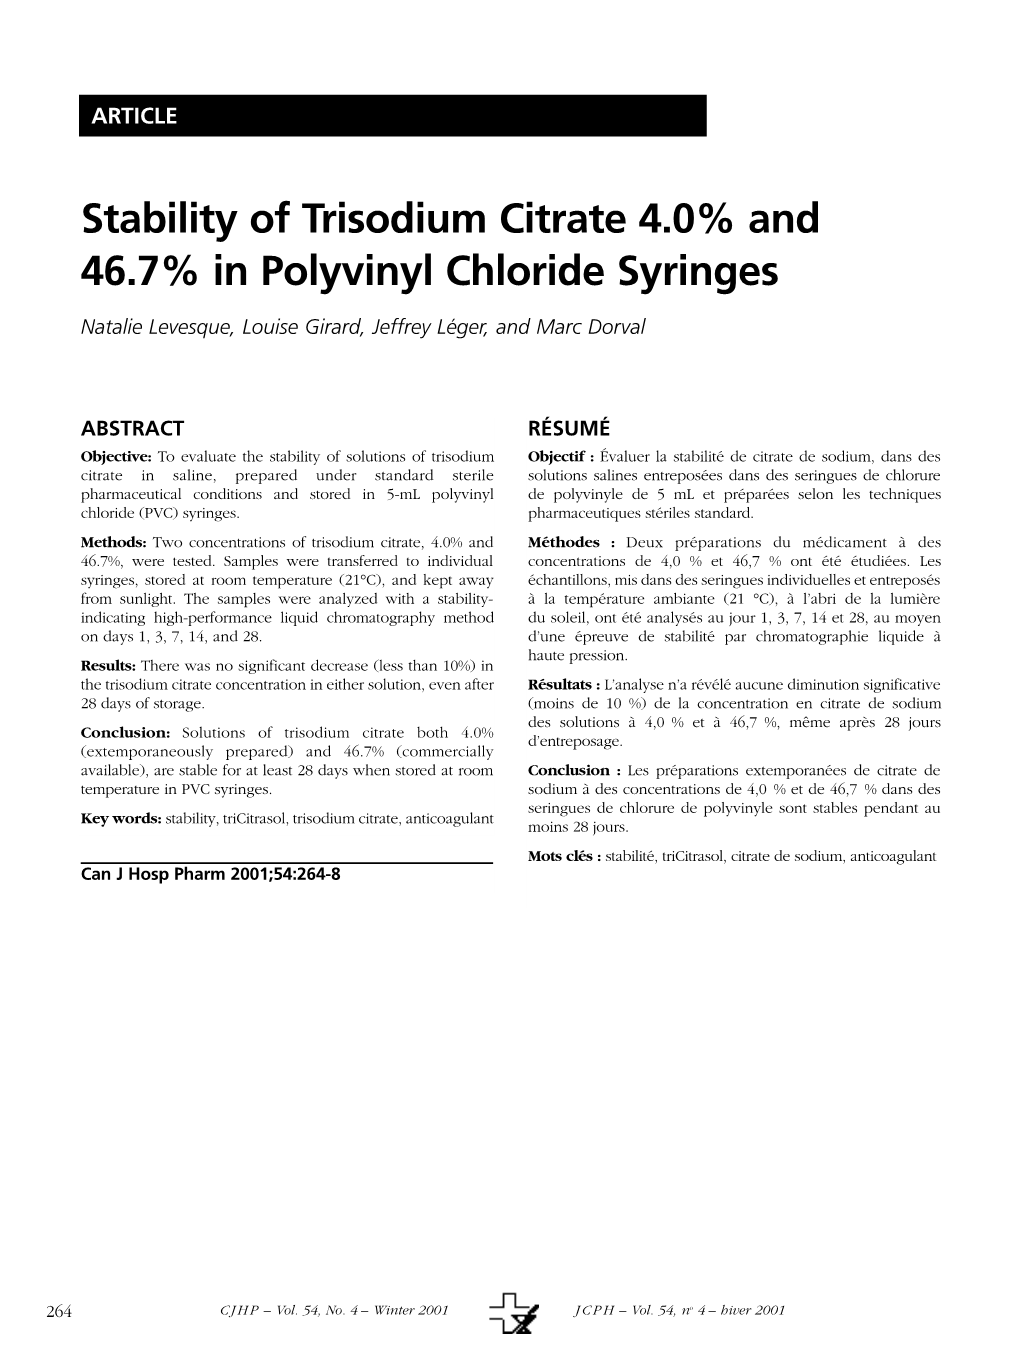 Stability of Trisodium Citrate 4.0% and 46.7% in Polyvinyl Chloride Syringes